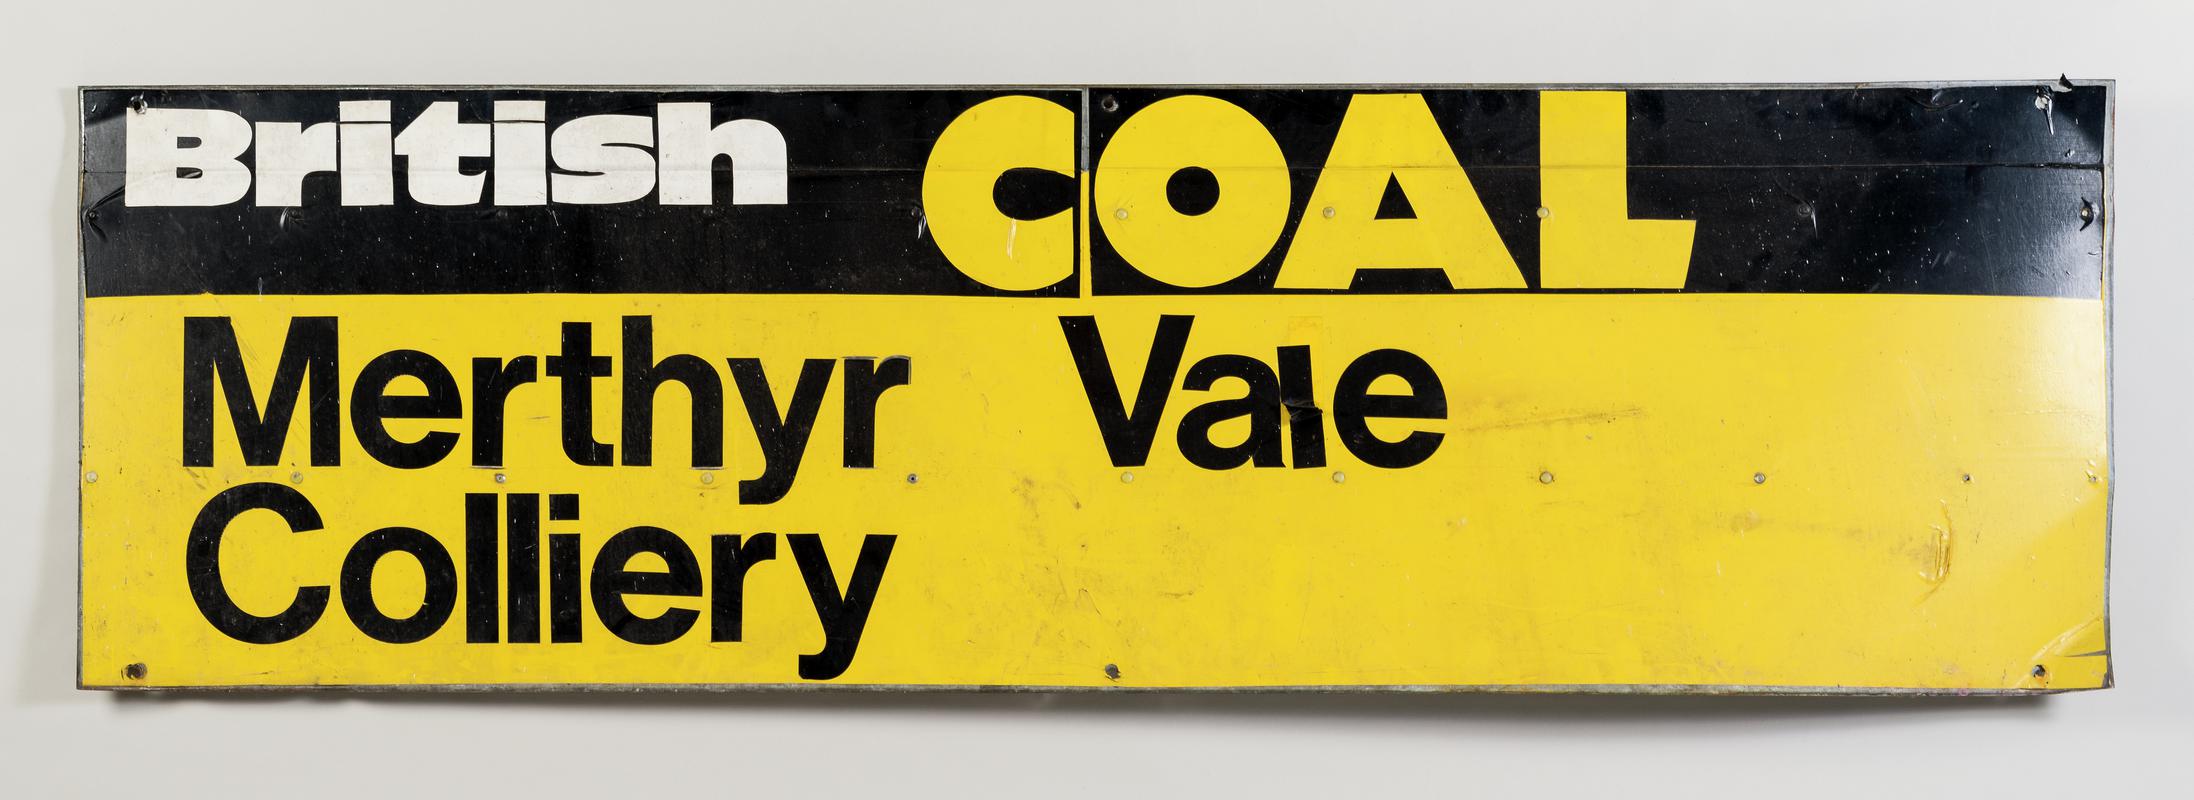 British Coal Merthyr Vale Colliery sign, originally at entrance to colliery.